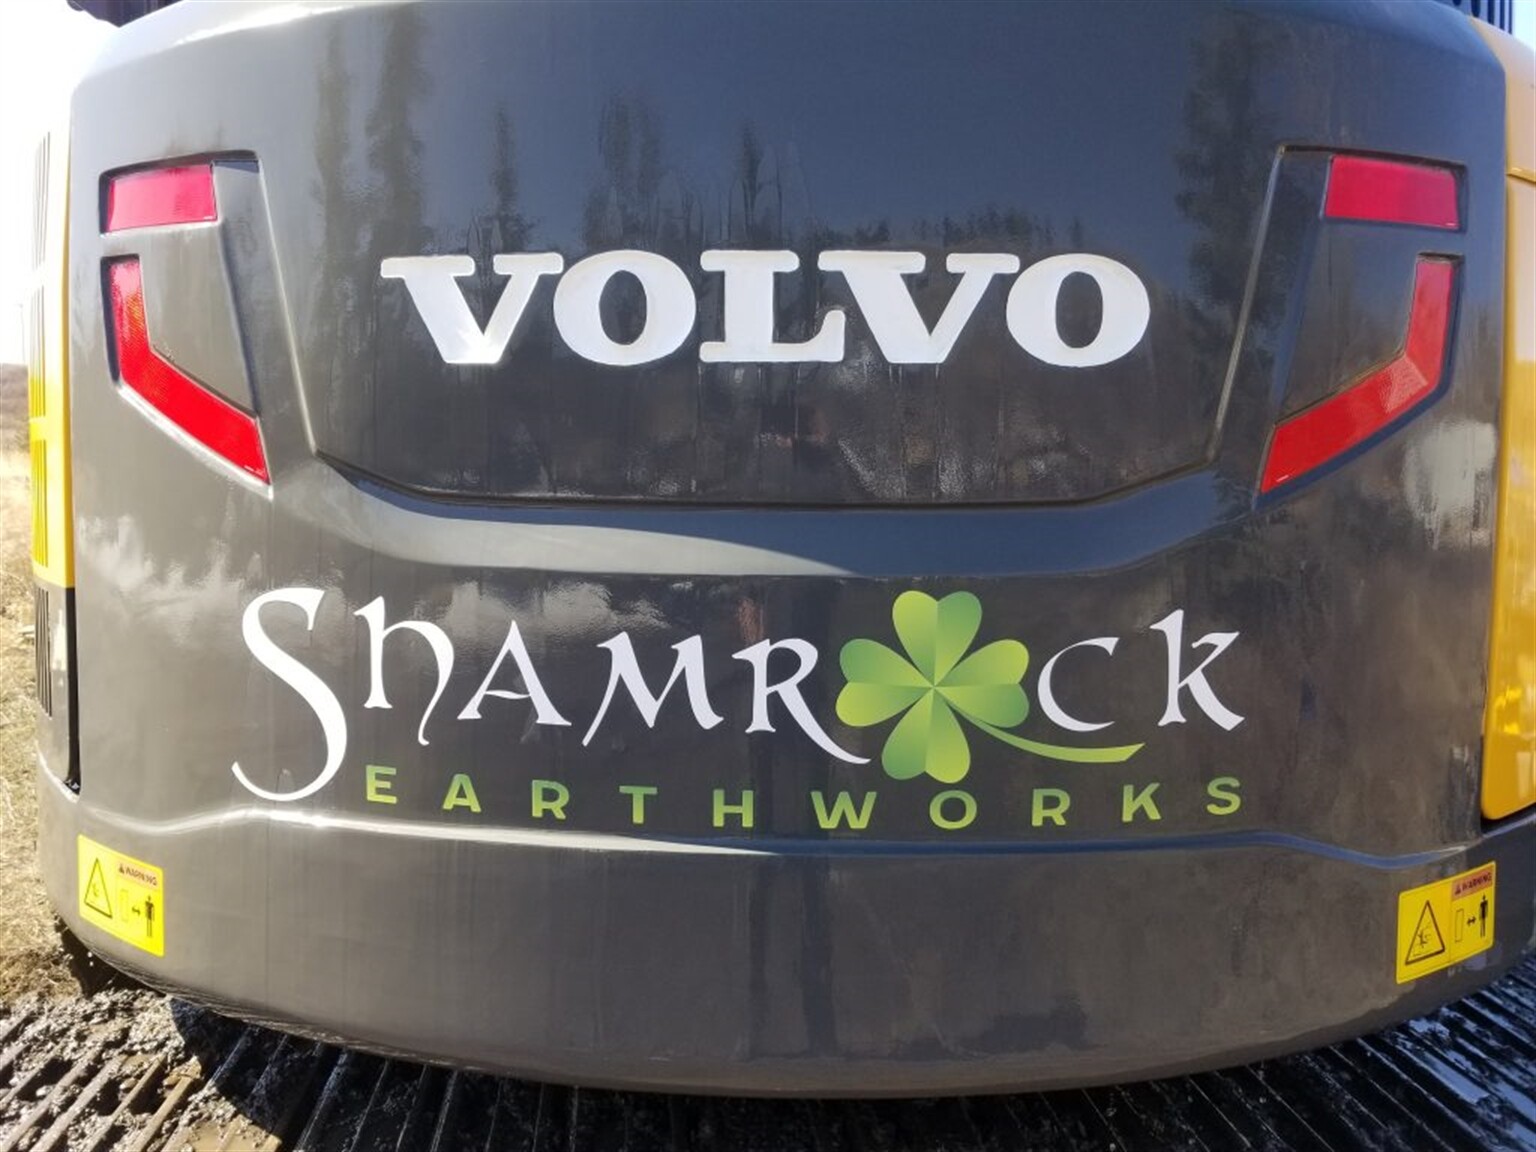 Getting social with Shamrock Earthworks